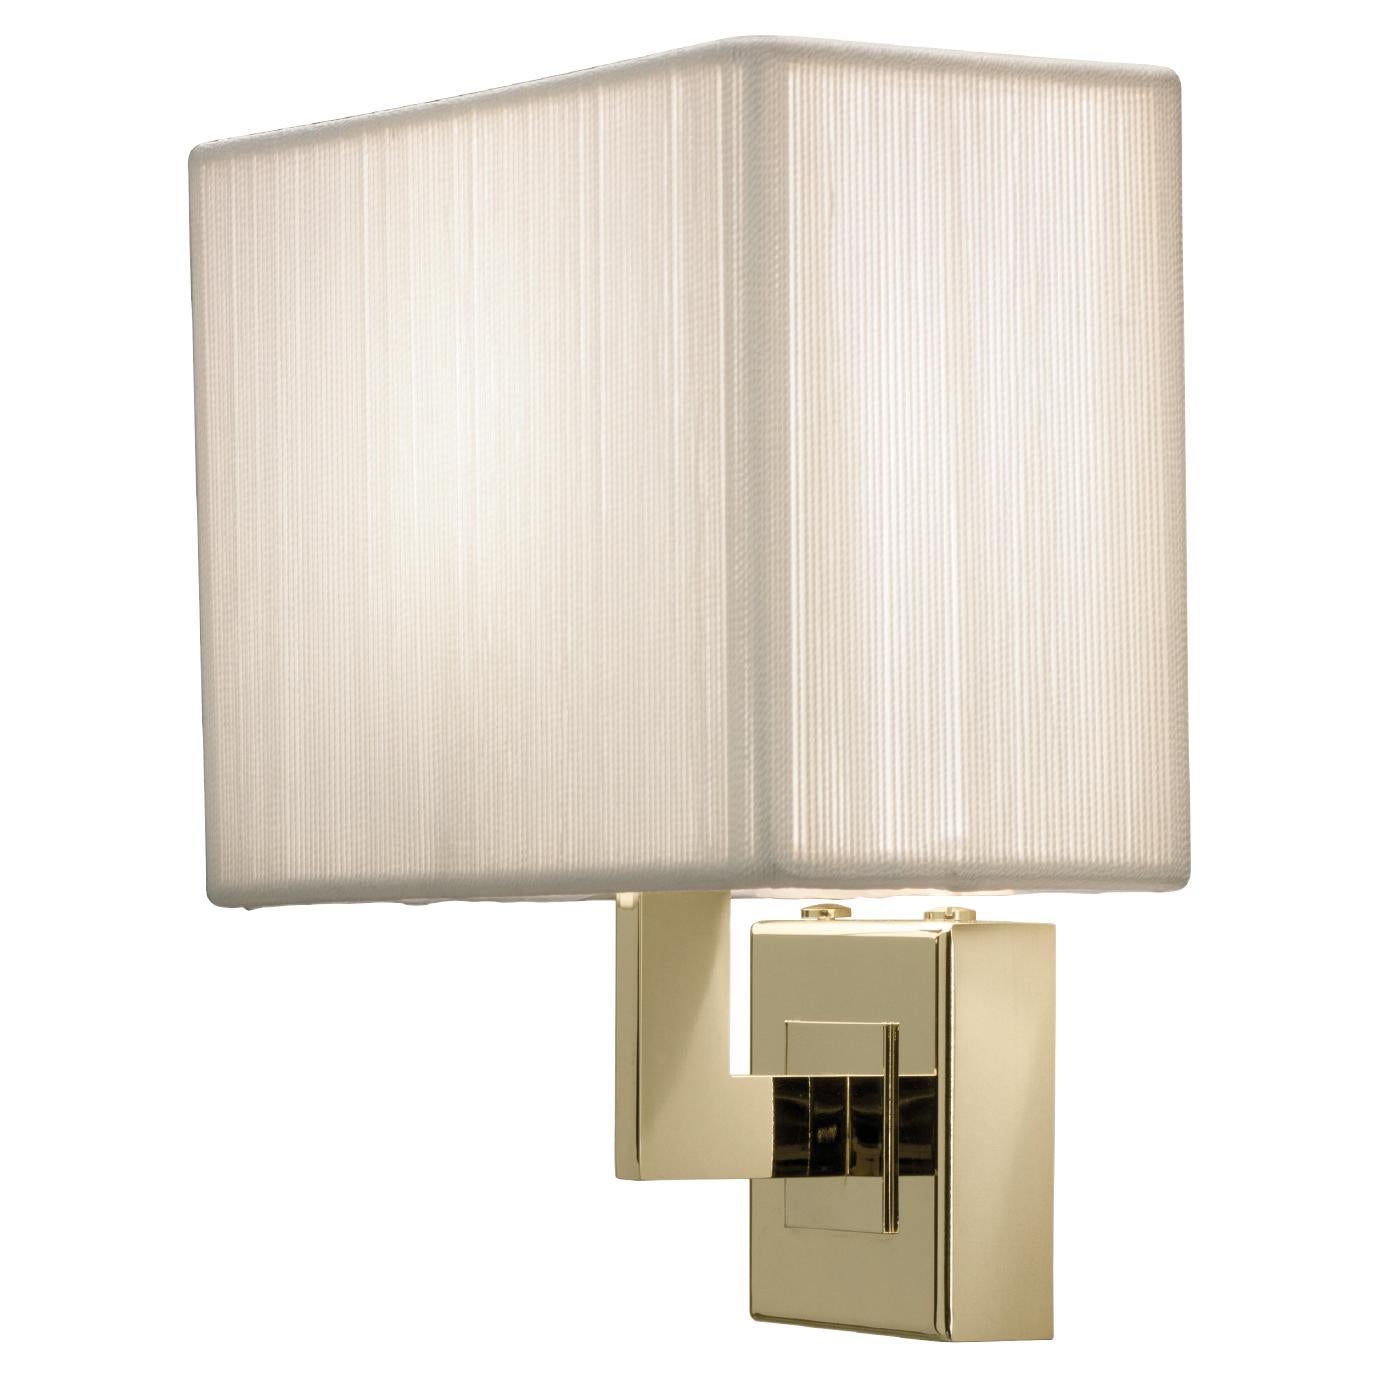 Axolight Clavius Small Wall Lamp with Arm in White Lampshade and Gold Finish